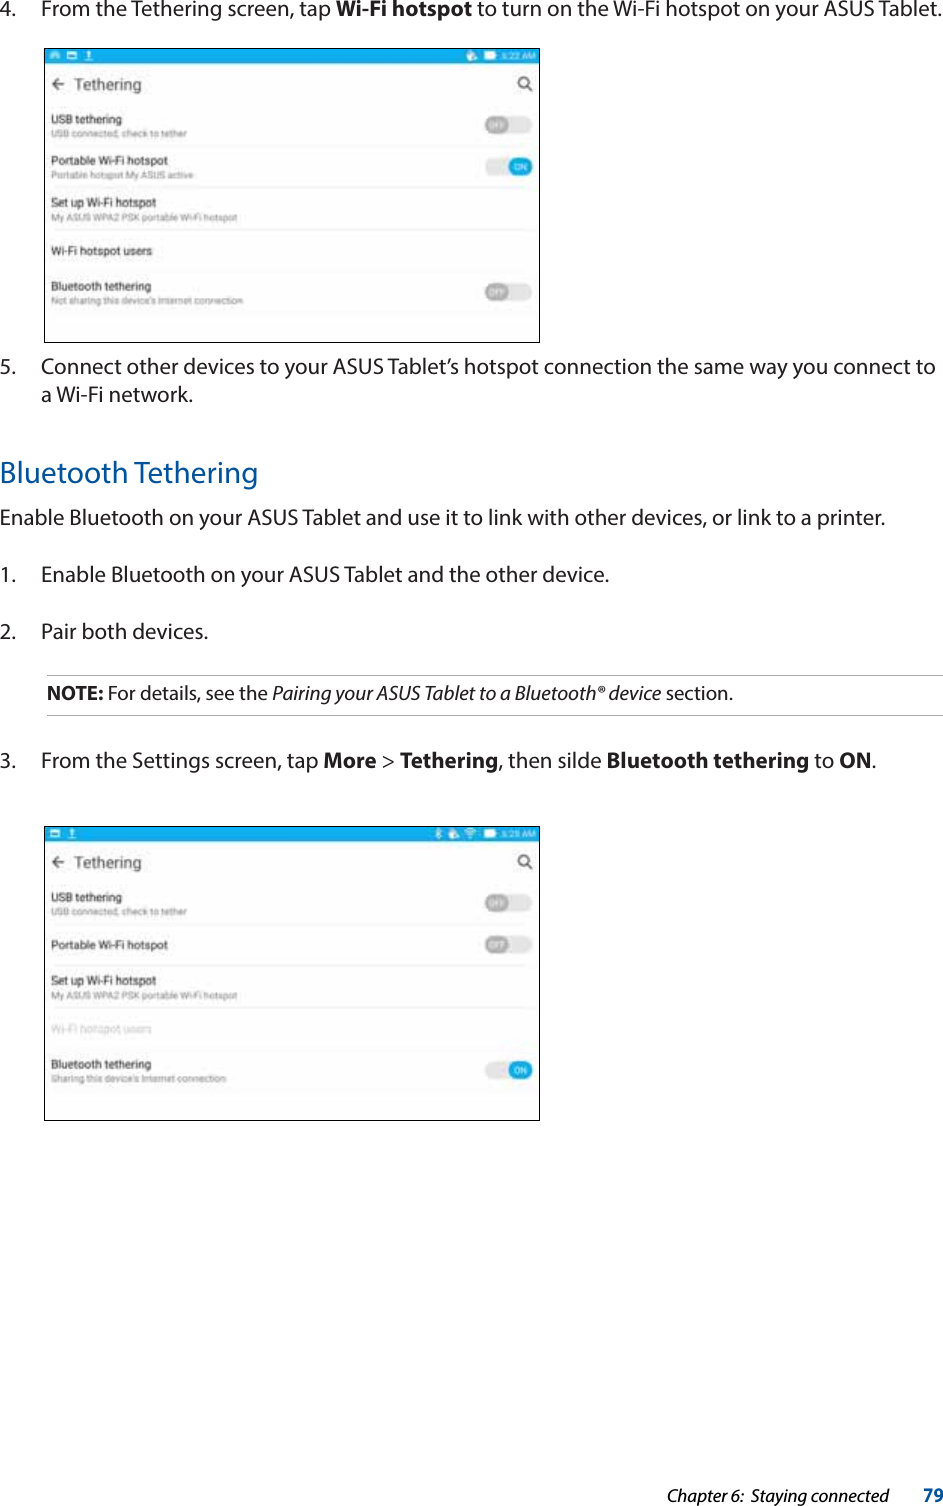 Chapter 6:  Staying connected79Bluetooth TetheringEnable Bluetooth on your ASUS Tablet and use it to link with other devices, or link to a printer.1.  Enable Bluetooth on your ASUS Tablet and the other device.2.  Pair both devices.NOTE: For details, see the Pairing your ASUS Tablet to a Bluetooth® device section.3.  From the Settings screen, tap More &gt; Tethering, then silde Bluetooth tethering to ON.4.  From the Tethering screen, tap Wi-Fi hotspot to turn on the Wi-Fi hotspot on your ASUS Tablet.5.  Connect other devices to your ASUS Tablet’s hotspot connection the same way you connect to a Wi-Fi network.